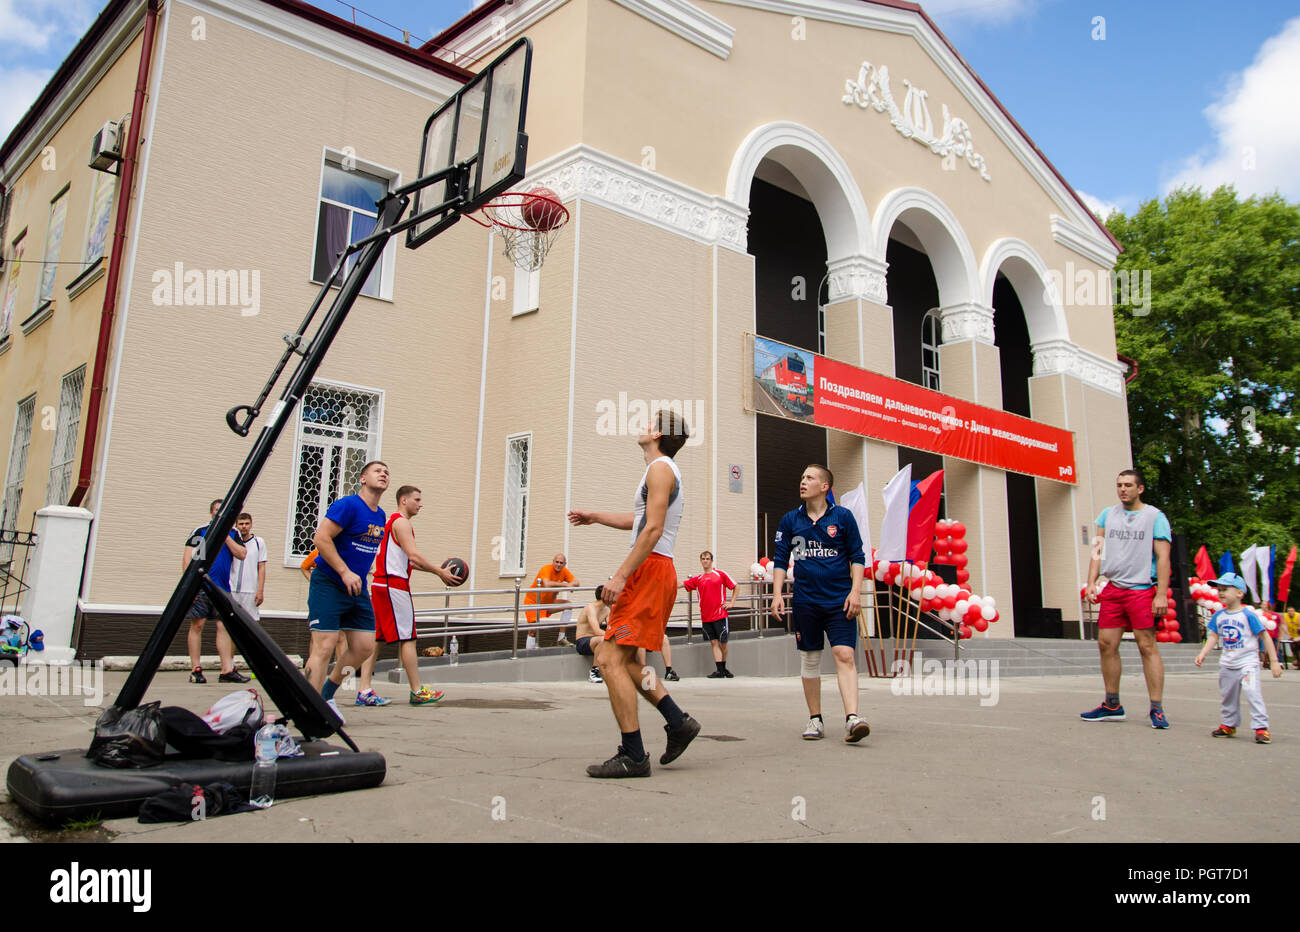 Komsomolsk-on-Amur, Russia, 1 August 2015. Railroader's day. Young men play amateur basketball in summer. Low point shooting Stock Photo